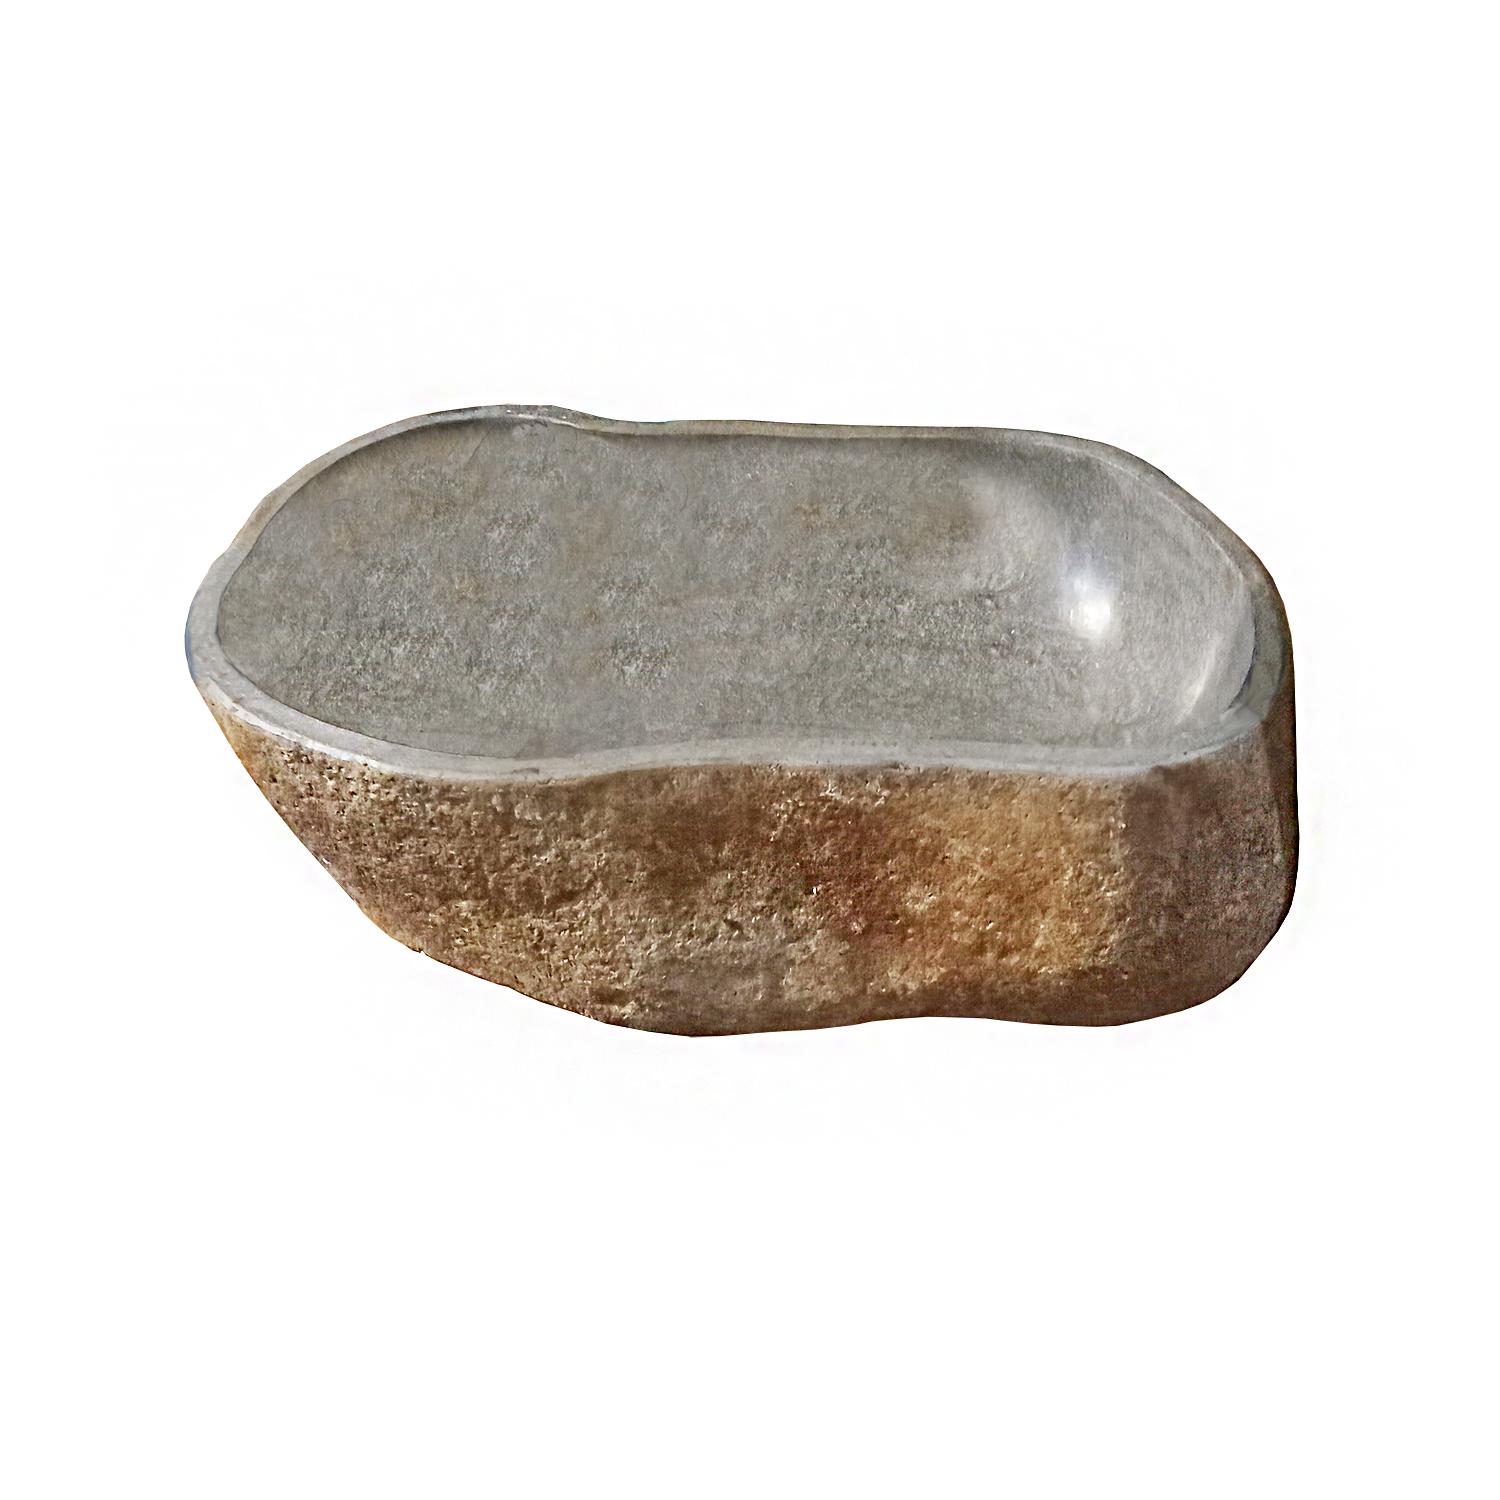 Stone Sink or Basin from Indonesia 4